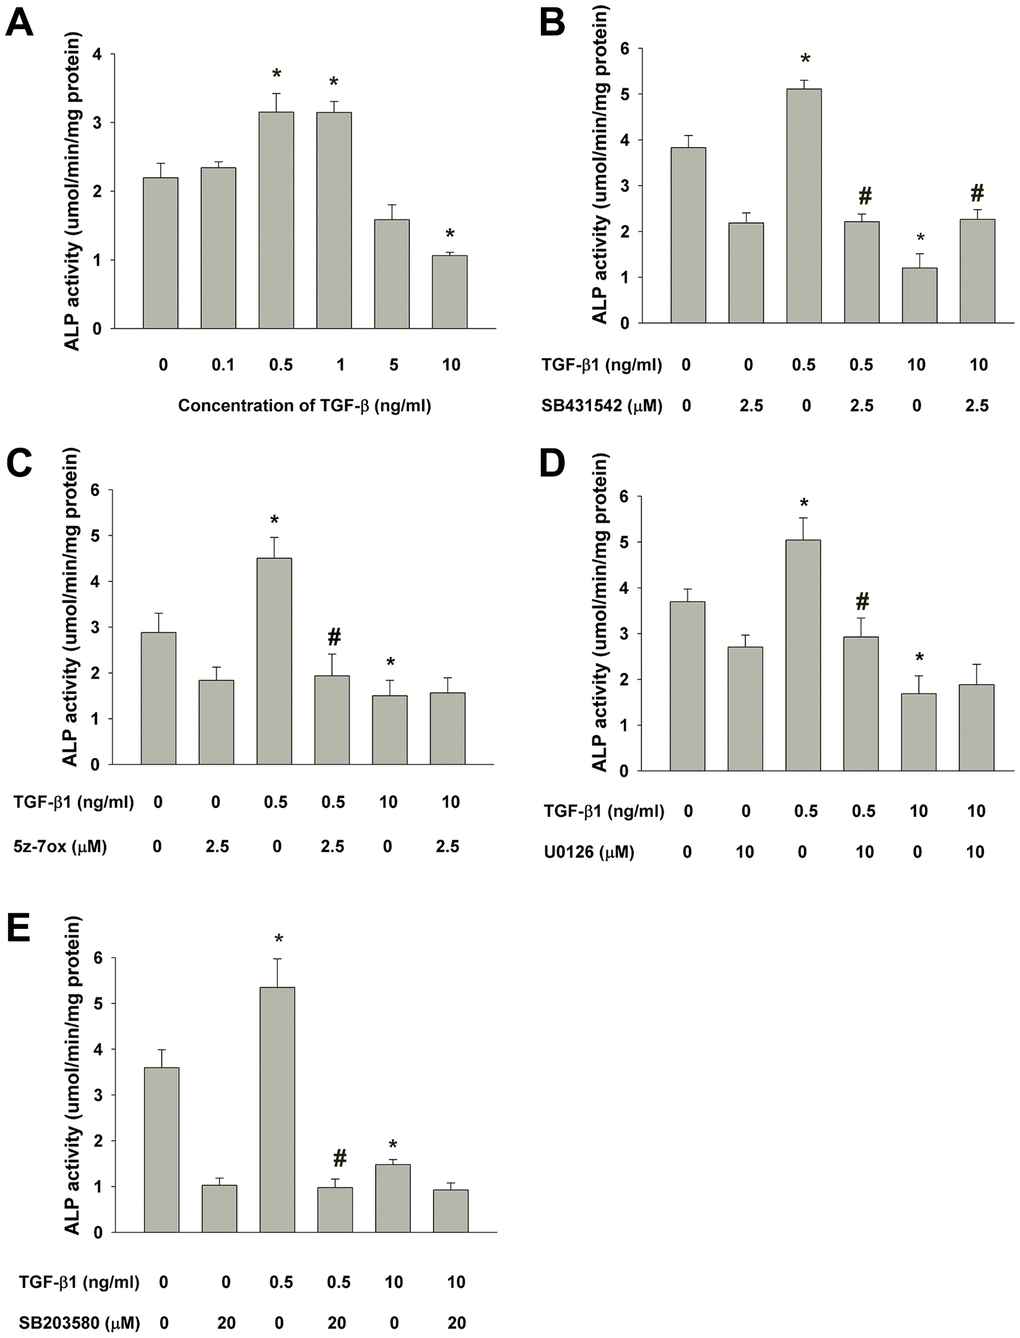 Effect of TGF-β1 on the ALP activities of cultured SHED as analyzed by ALP enzyme activity assay. (A) Quantitative ALP enzyme activity assay of SHED with/without exposure to TGF-β1 for 5 days. (B) Effect of SB431542 on the TGF-β1-induced increase or decrease in ALP activity of SHED. (C) Effect of 5z-7oxozeaenol on the TGF-β1-induced increase or decrease in ALP activity of SHED. (D) Effect of U0126 on the TGF-β1-induced increase or decrease in ALP activity of SHED, (E) Effect of SB203580 on the TGF-β1-induced increase or decrease in ALP activity of SHED. *Denotes statistically significant difference when compared with respective control group. #Denotes statistically significant difference when compared with respective TGF-β1-treated group.